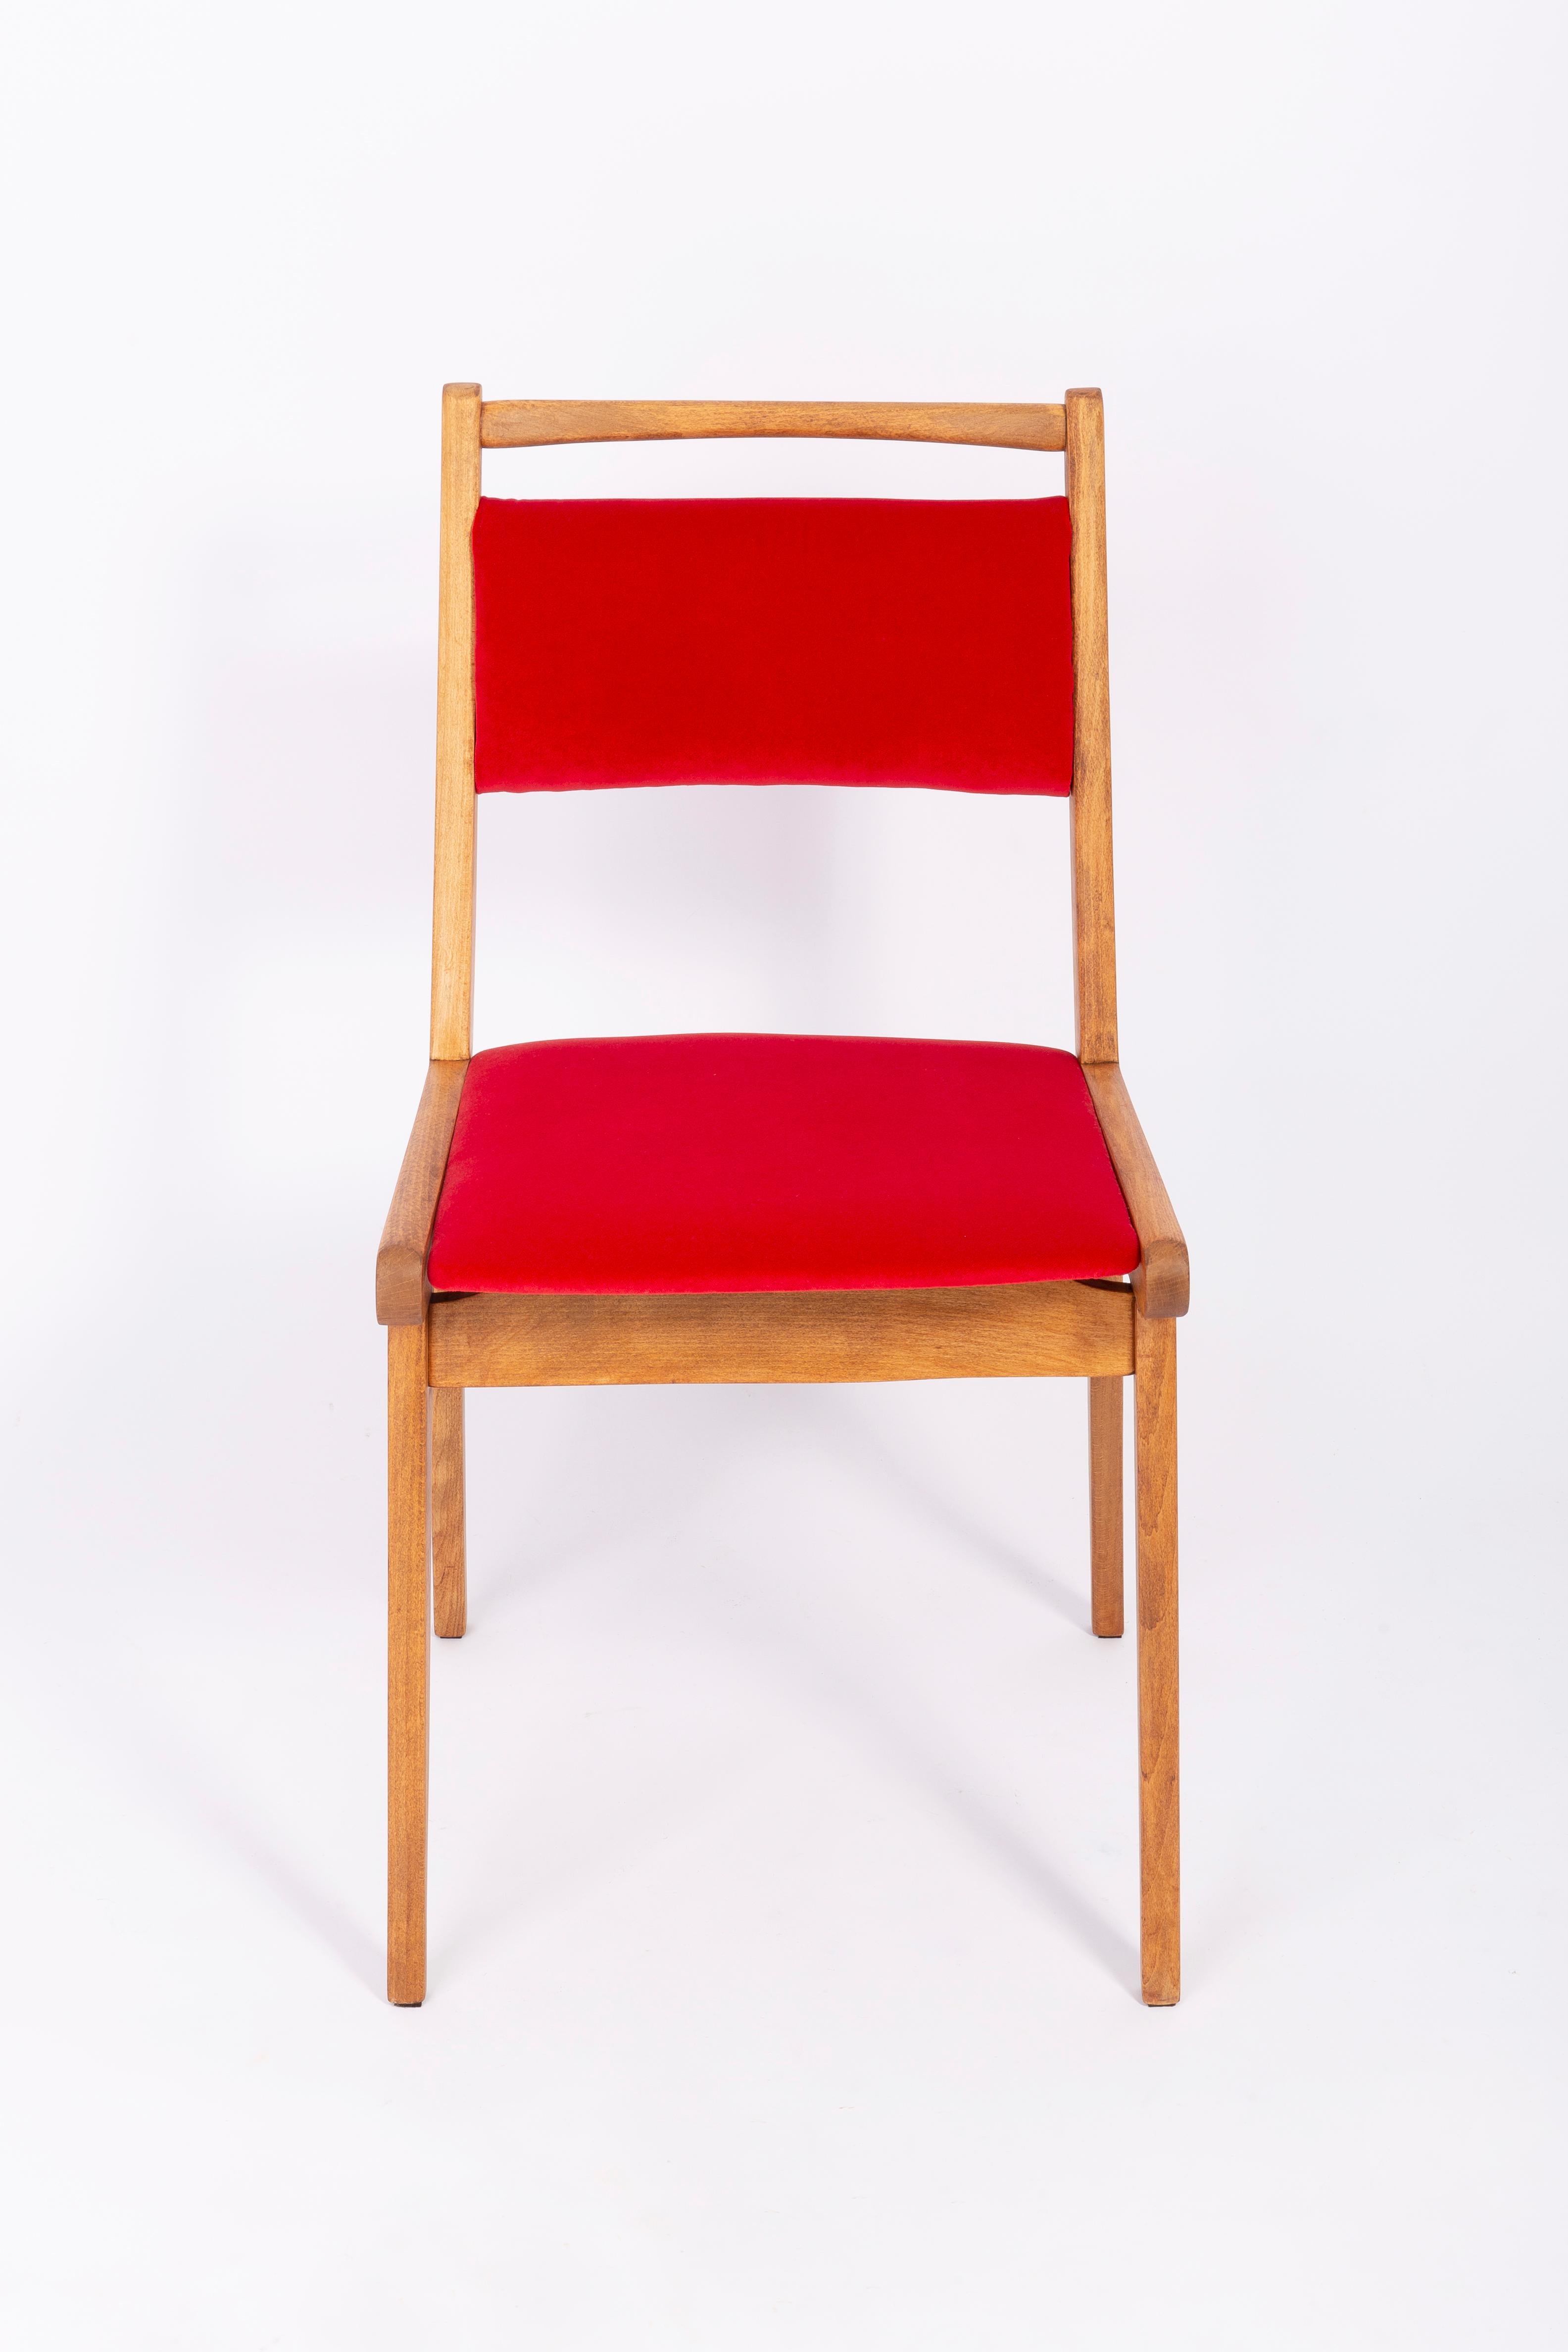 Set of Two 20th Century White and Red Velvet Chairs, Poland, 1960s For Sale 8